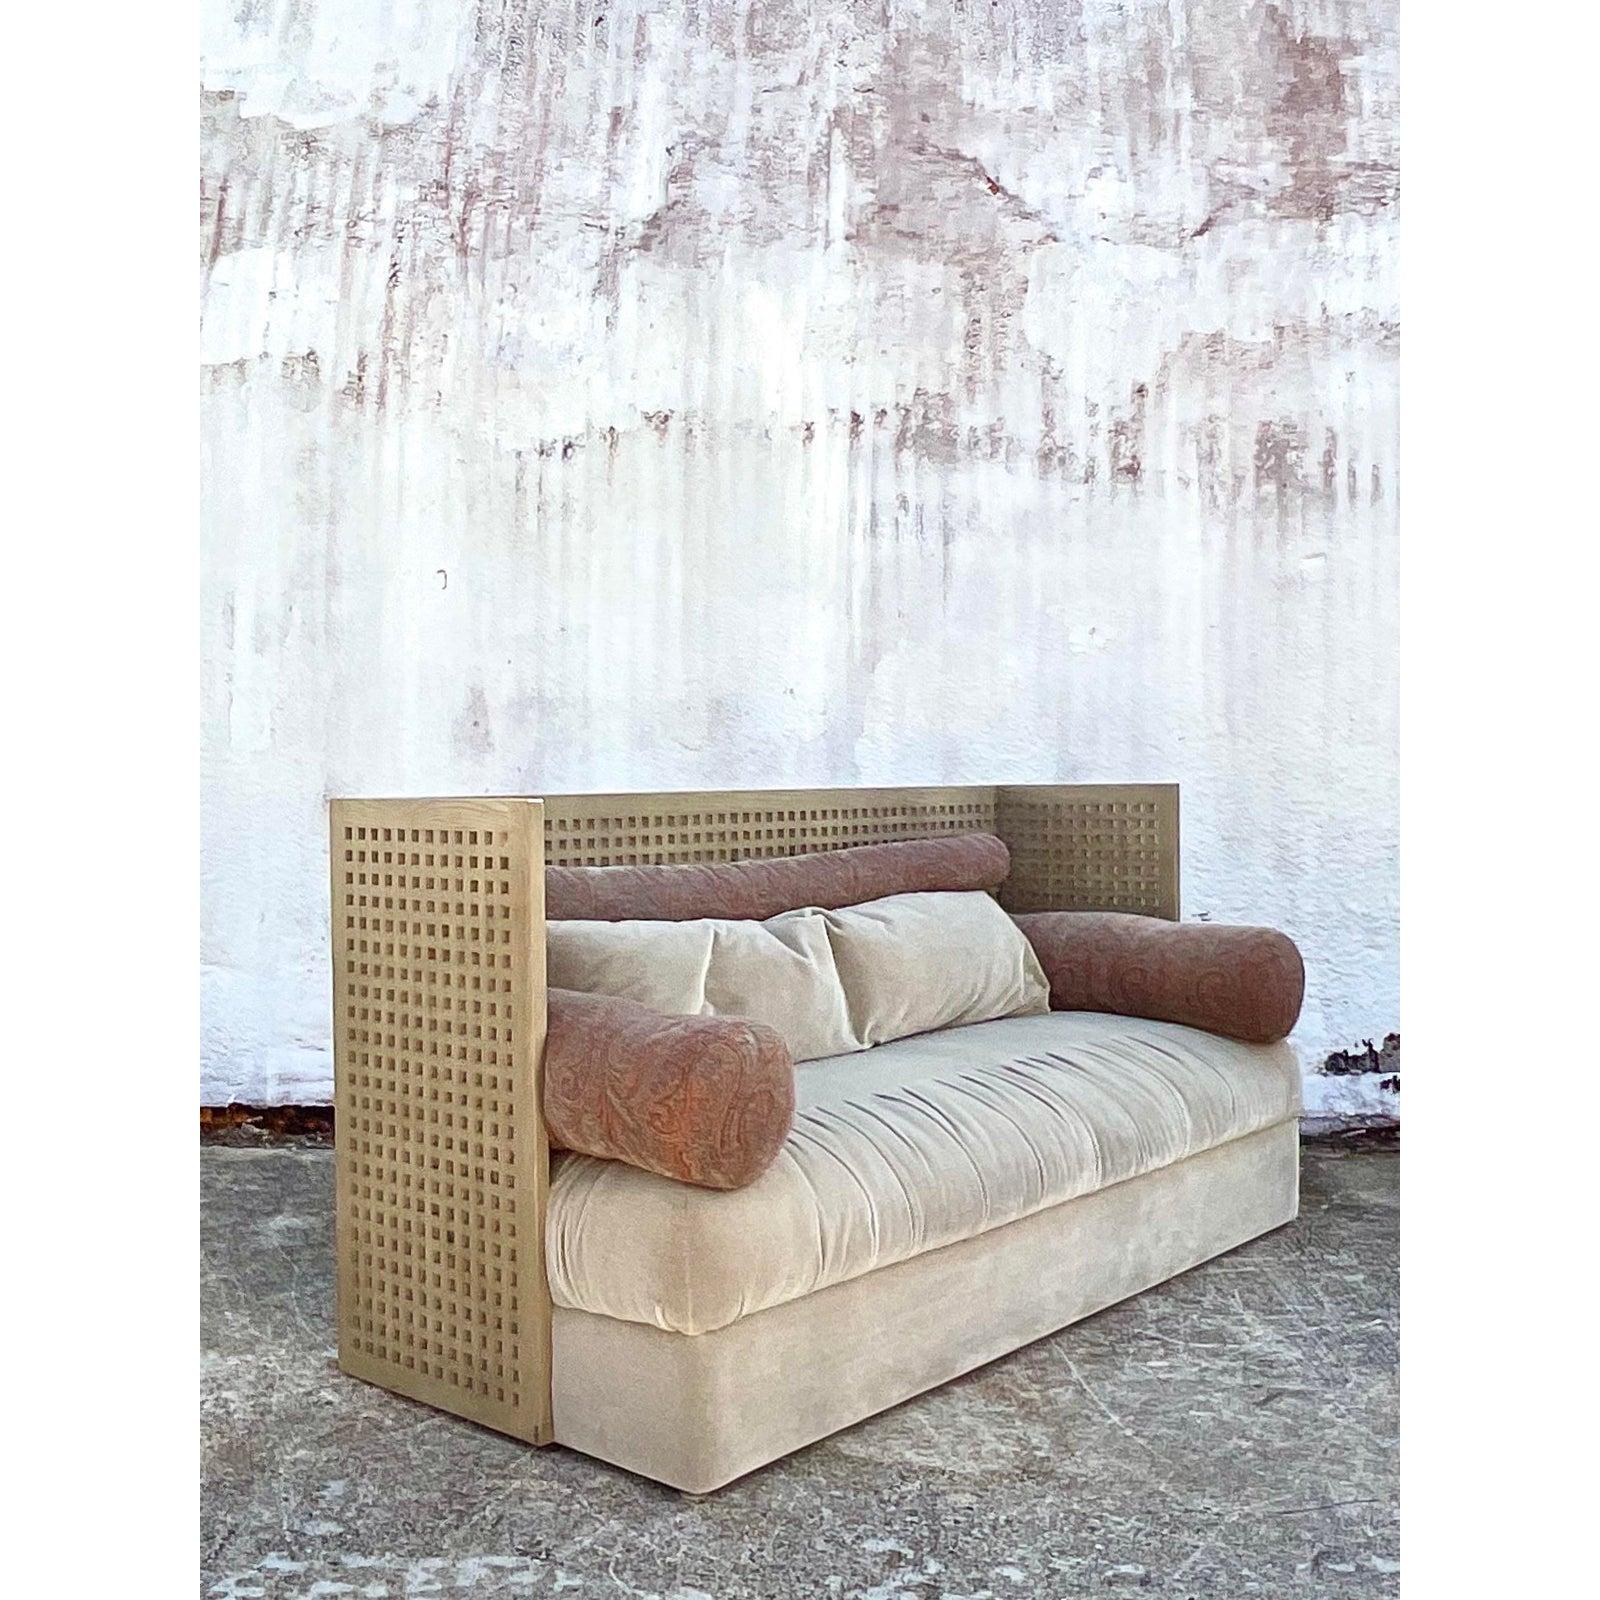 Exceptional vintage Postmodern sofa. Beautiful cerused grid wood frame. Big down pillow with a ruched velvet mohair body with a set of jacquard paisley bolsters. Done in the manner of Donghia. Acquired from a Palm Beach estate.